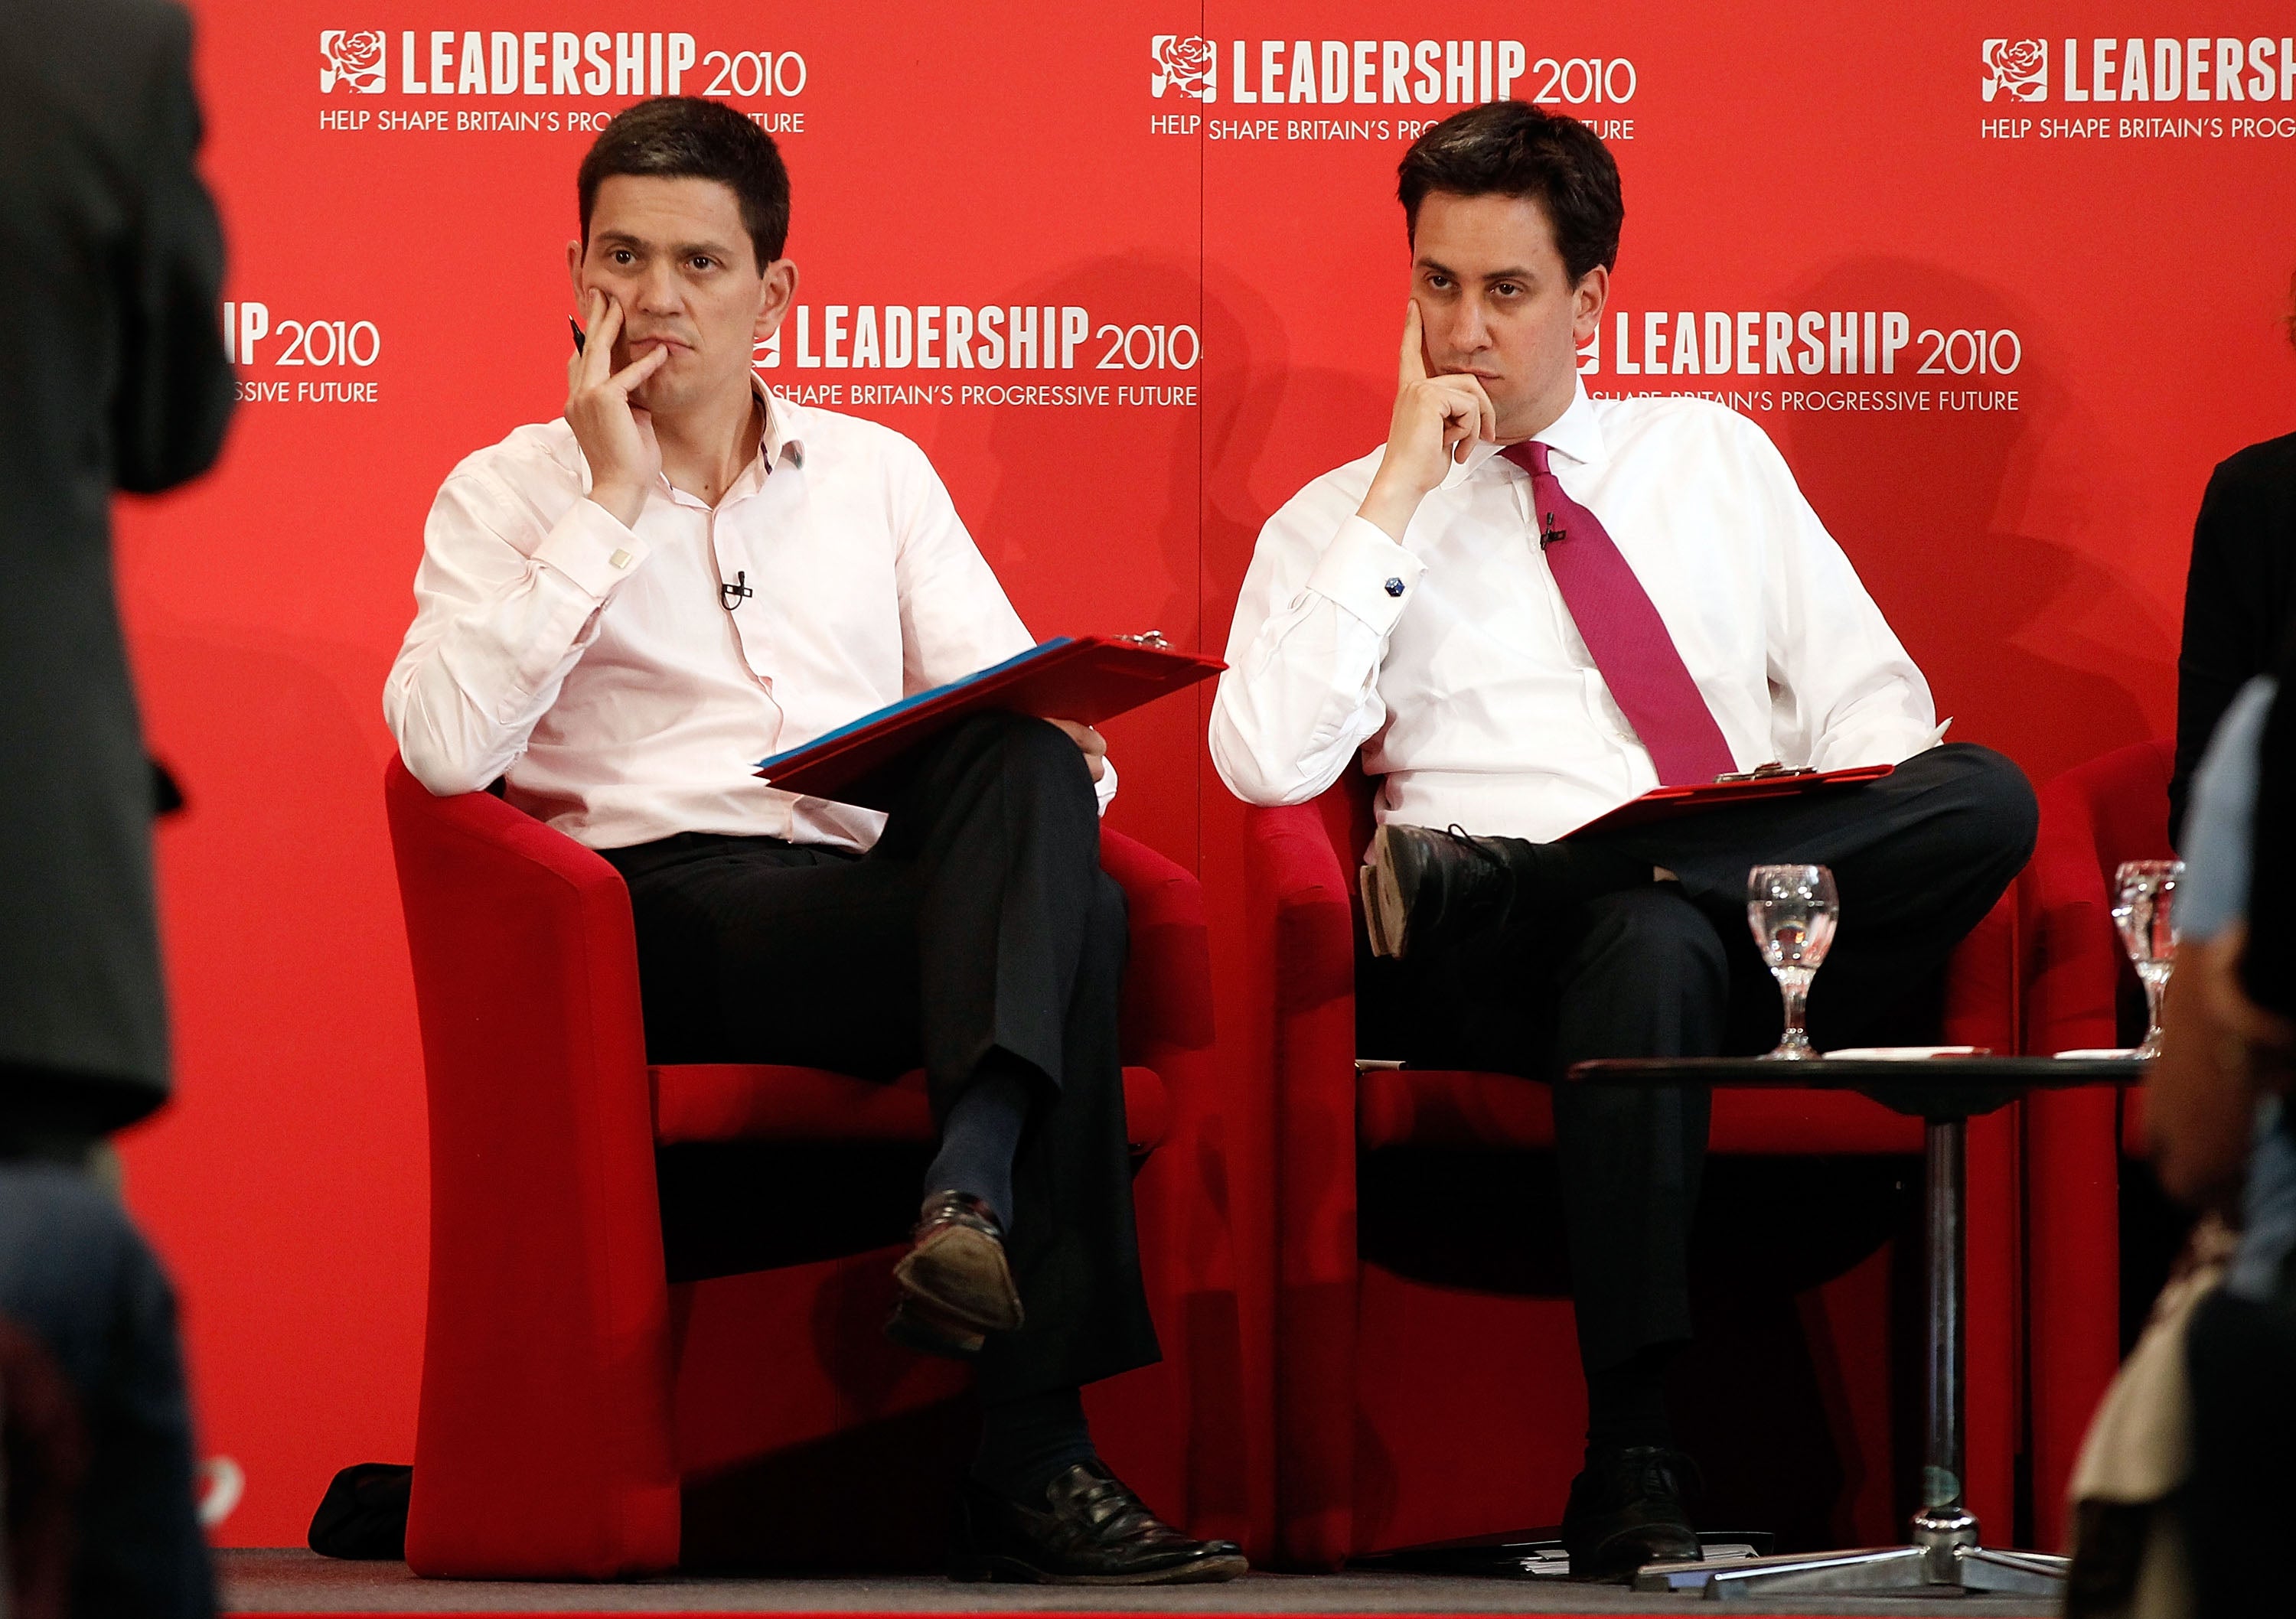 Peter Mandelson said that Labour’s troubles stemmed from Ed’s defeat of David Miliband by a margin of 1.4 per cent in 2010